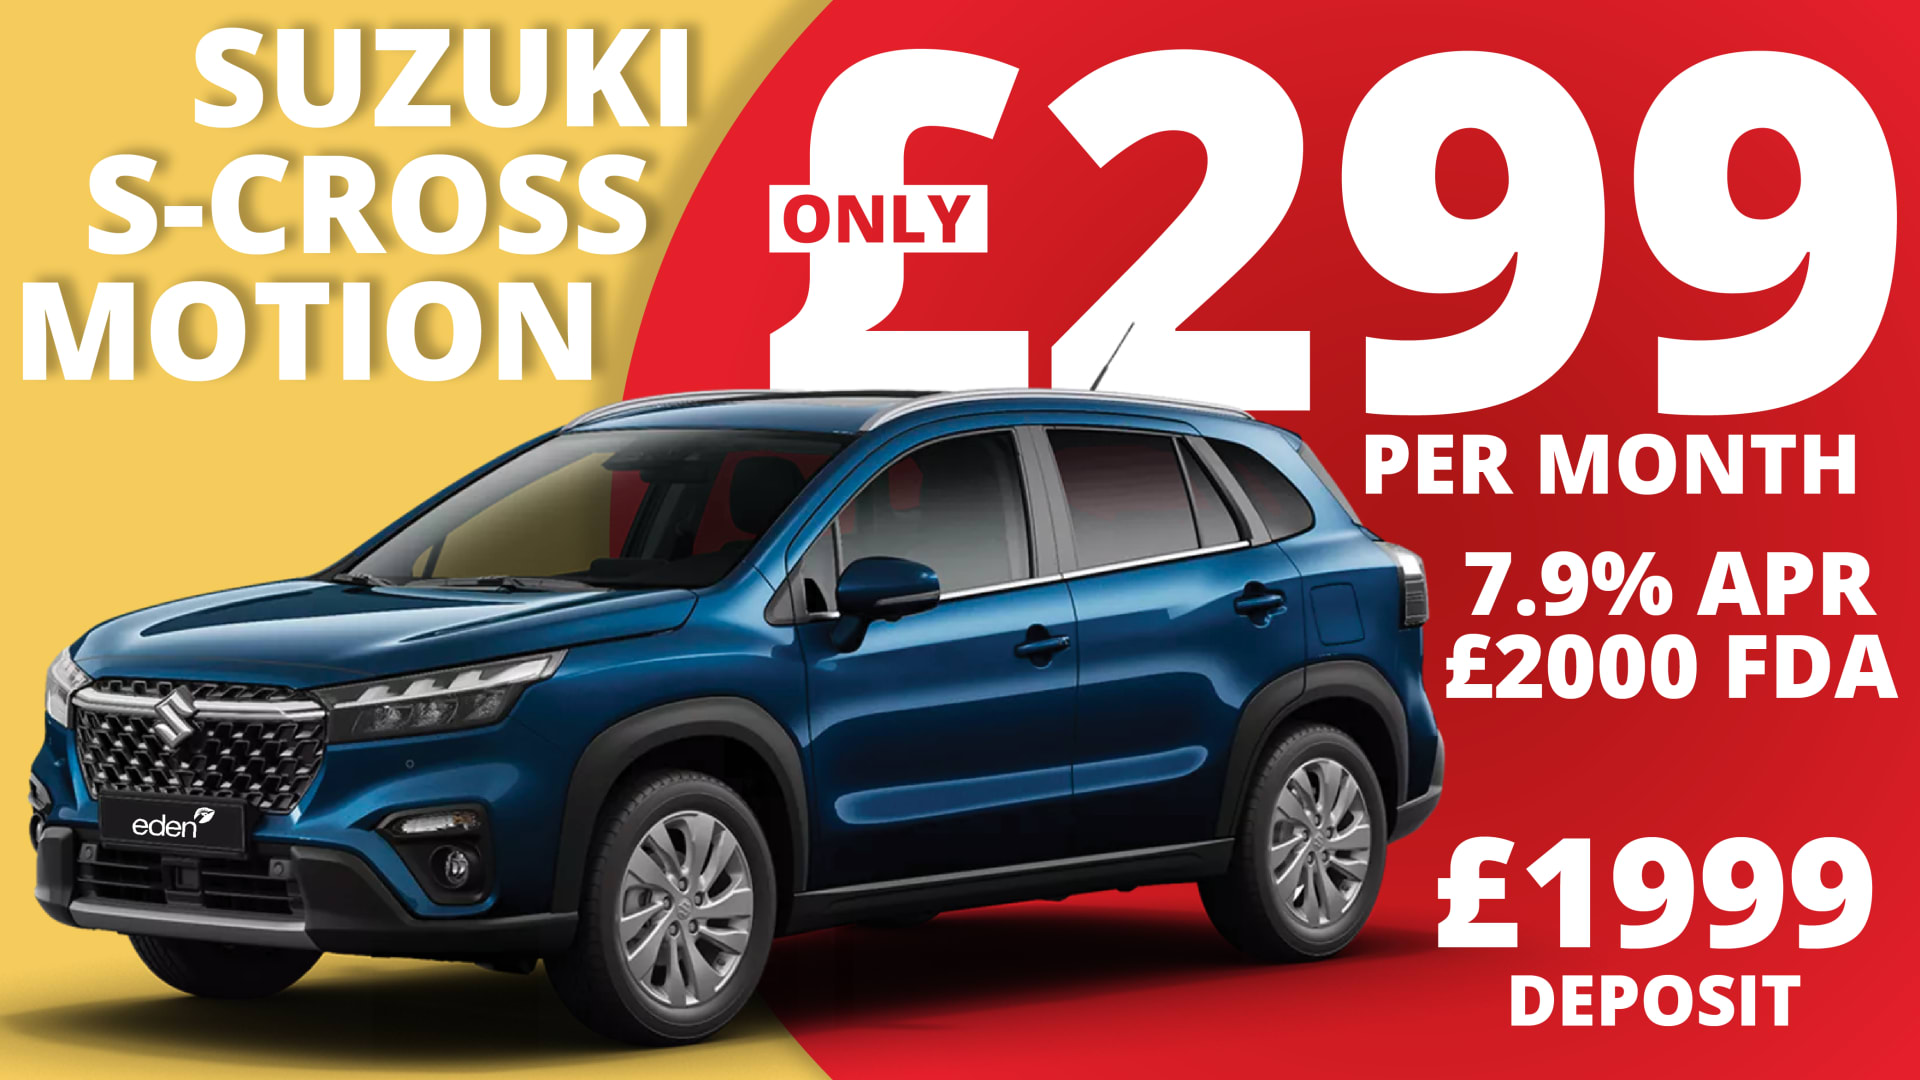 S-Cross Motion Just £299 Per Month!